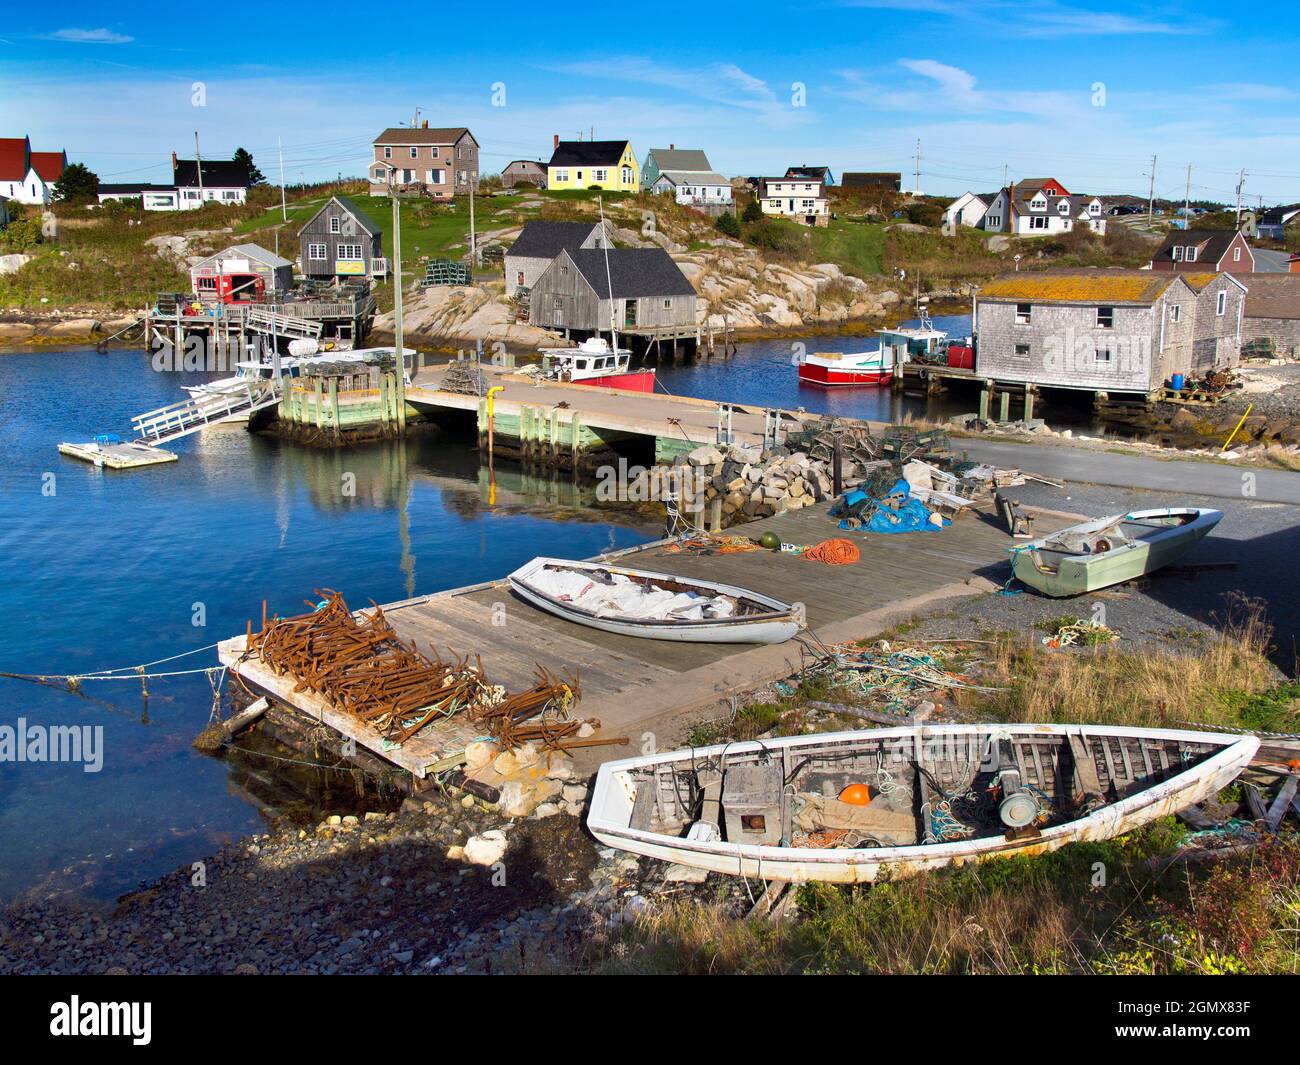 Peggy's Cove, Nova Scotia, Canada - 11 October 2013 Peggy's Cove is a tiny, quaint fishing village located on the eastern shore of St. Margarets Bay i Stock Photo